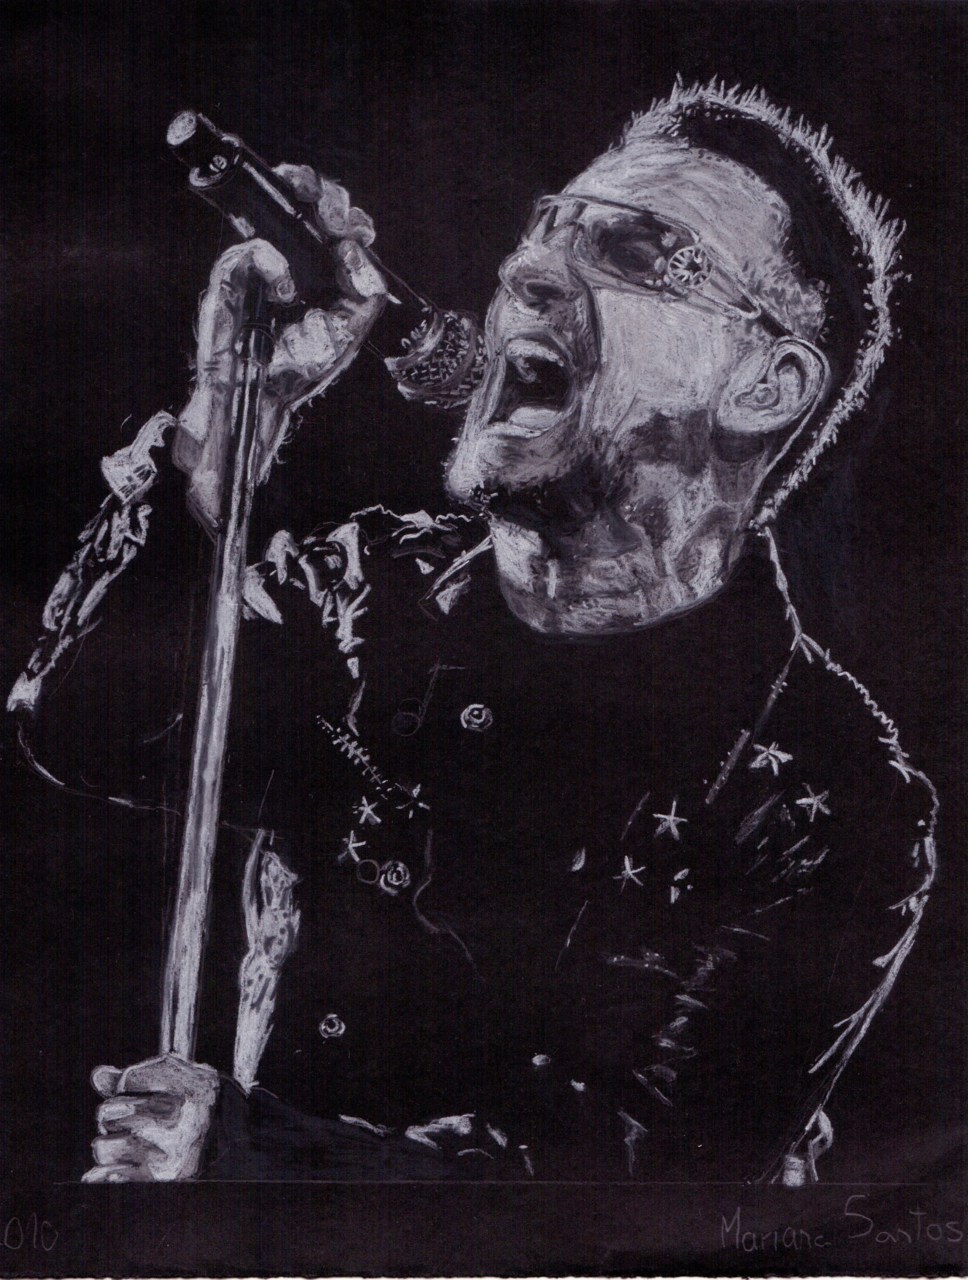 I did this painting of bono has a christmas present for my aunt and uncle, they are big U2 fans. Black Paper and pastel pencils 31/12/2010 - 15 years old if you want to see more of my work here’s my...